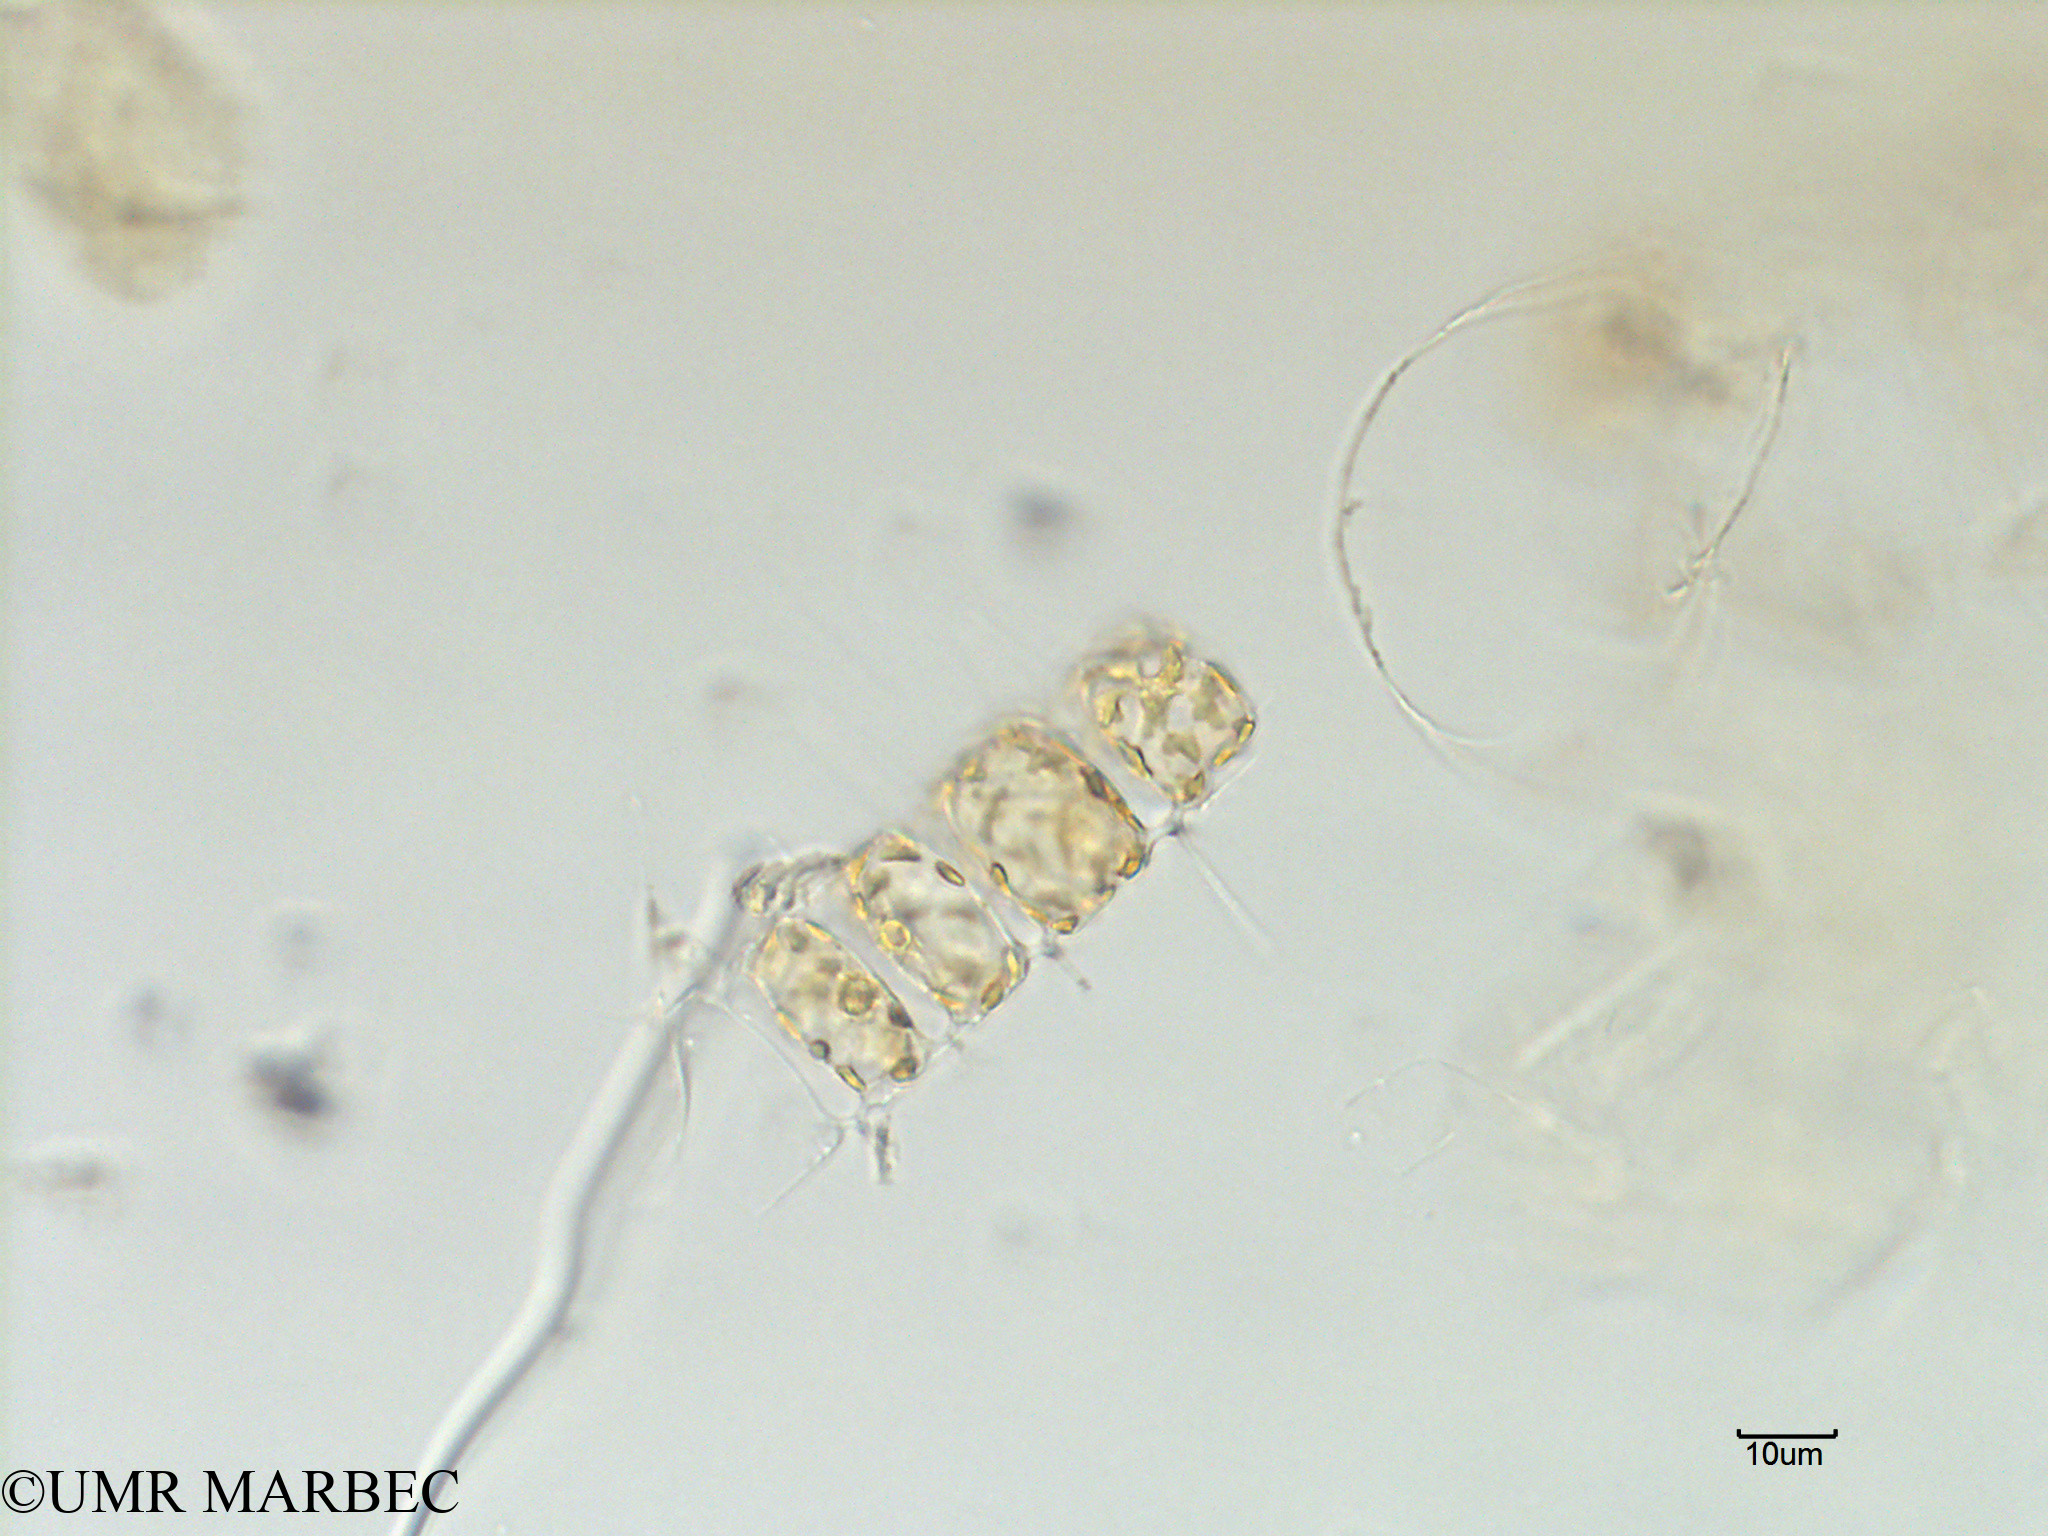 phyto/Scattered_Islands/mayotte_lagoon/SIREME May 2016/Chaetoceros sp35 (MAY3_chaetoceros_5-8).tif(copy).jpg